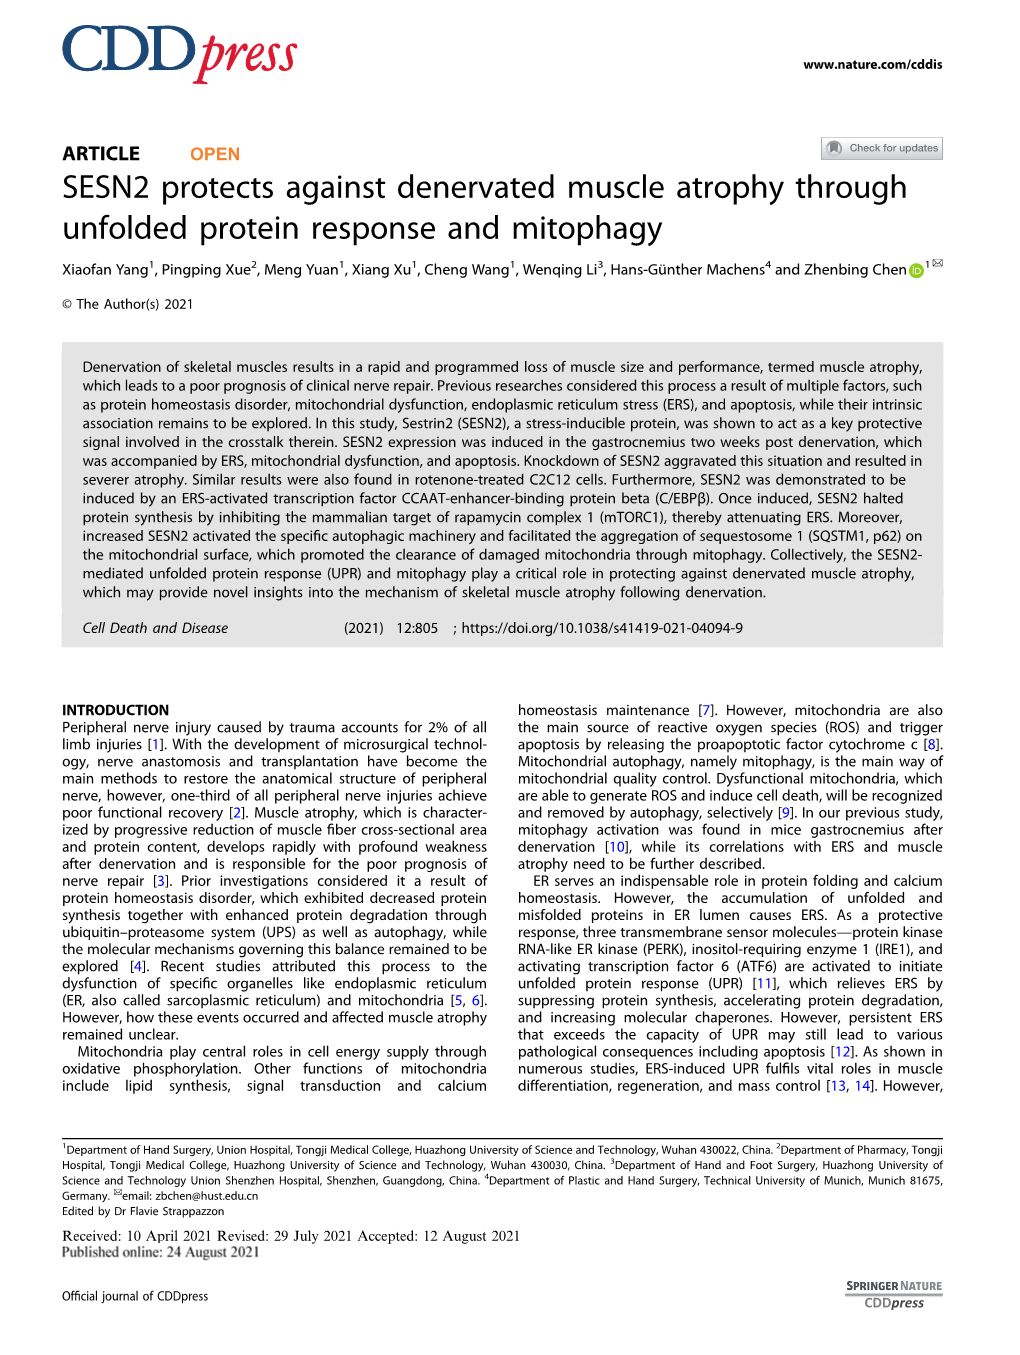 SESN2 Protects Against Denervated Muscle Atrophy Through Unfolded